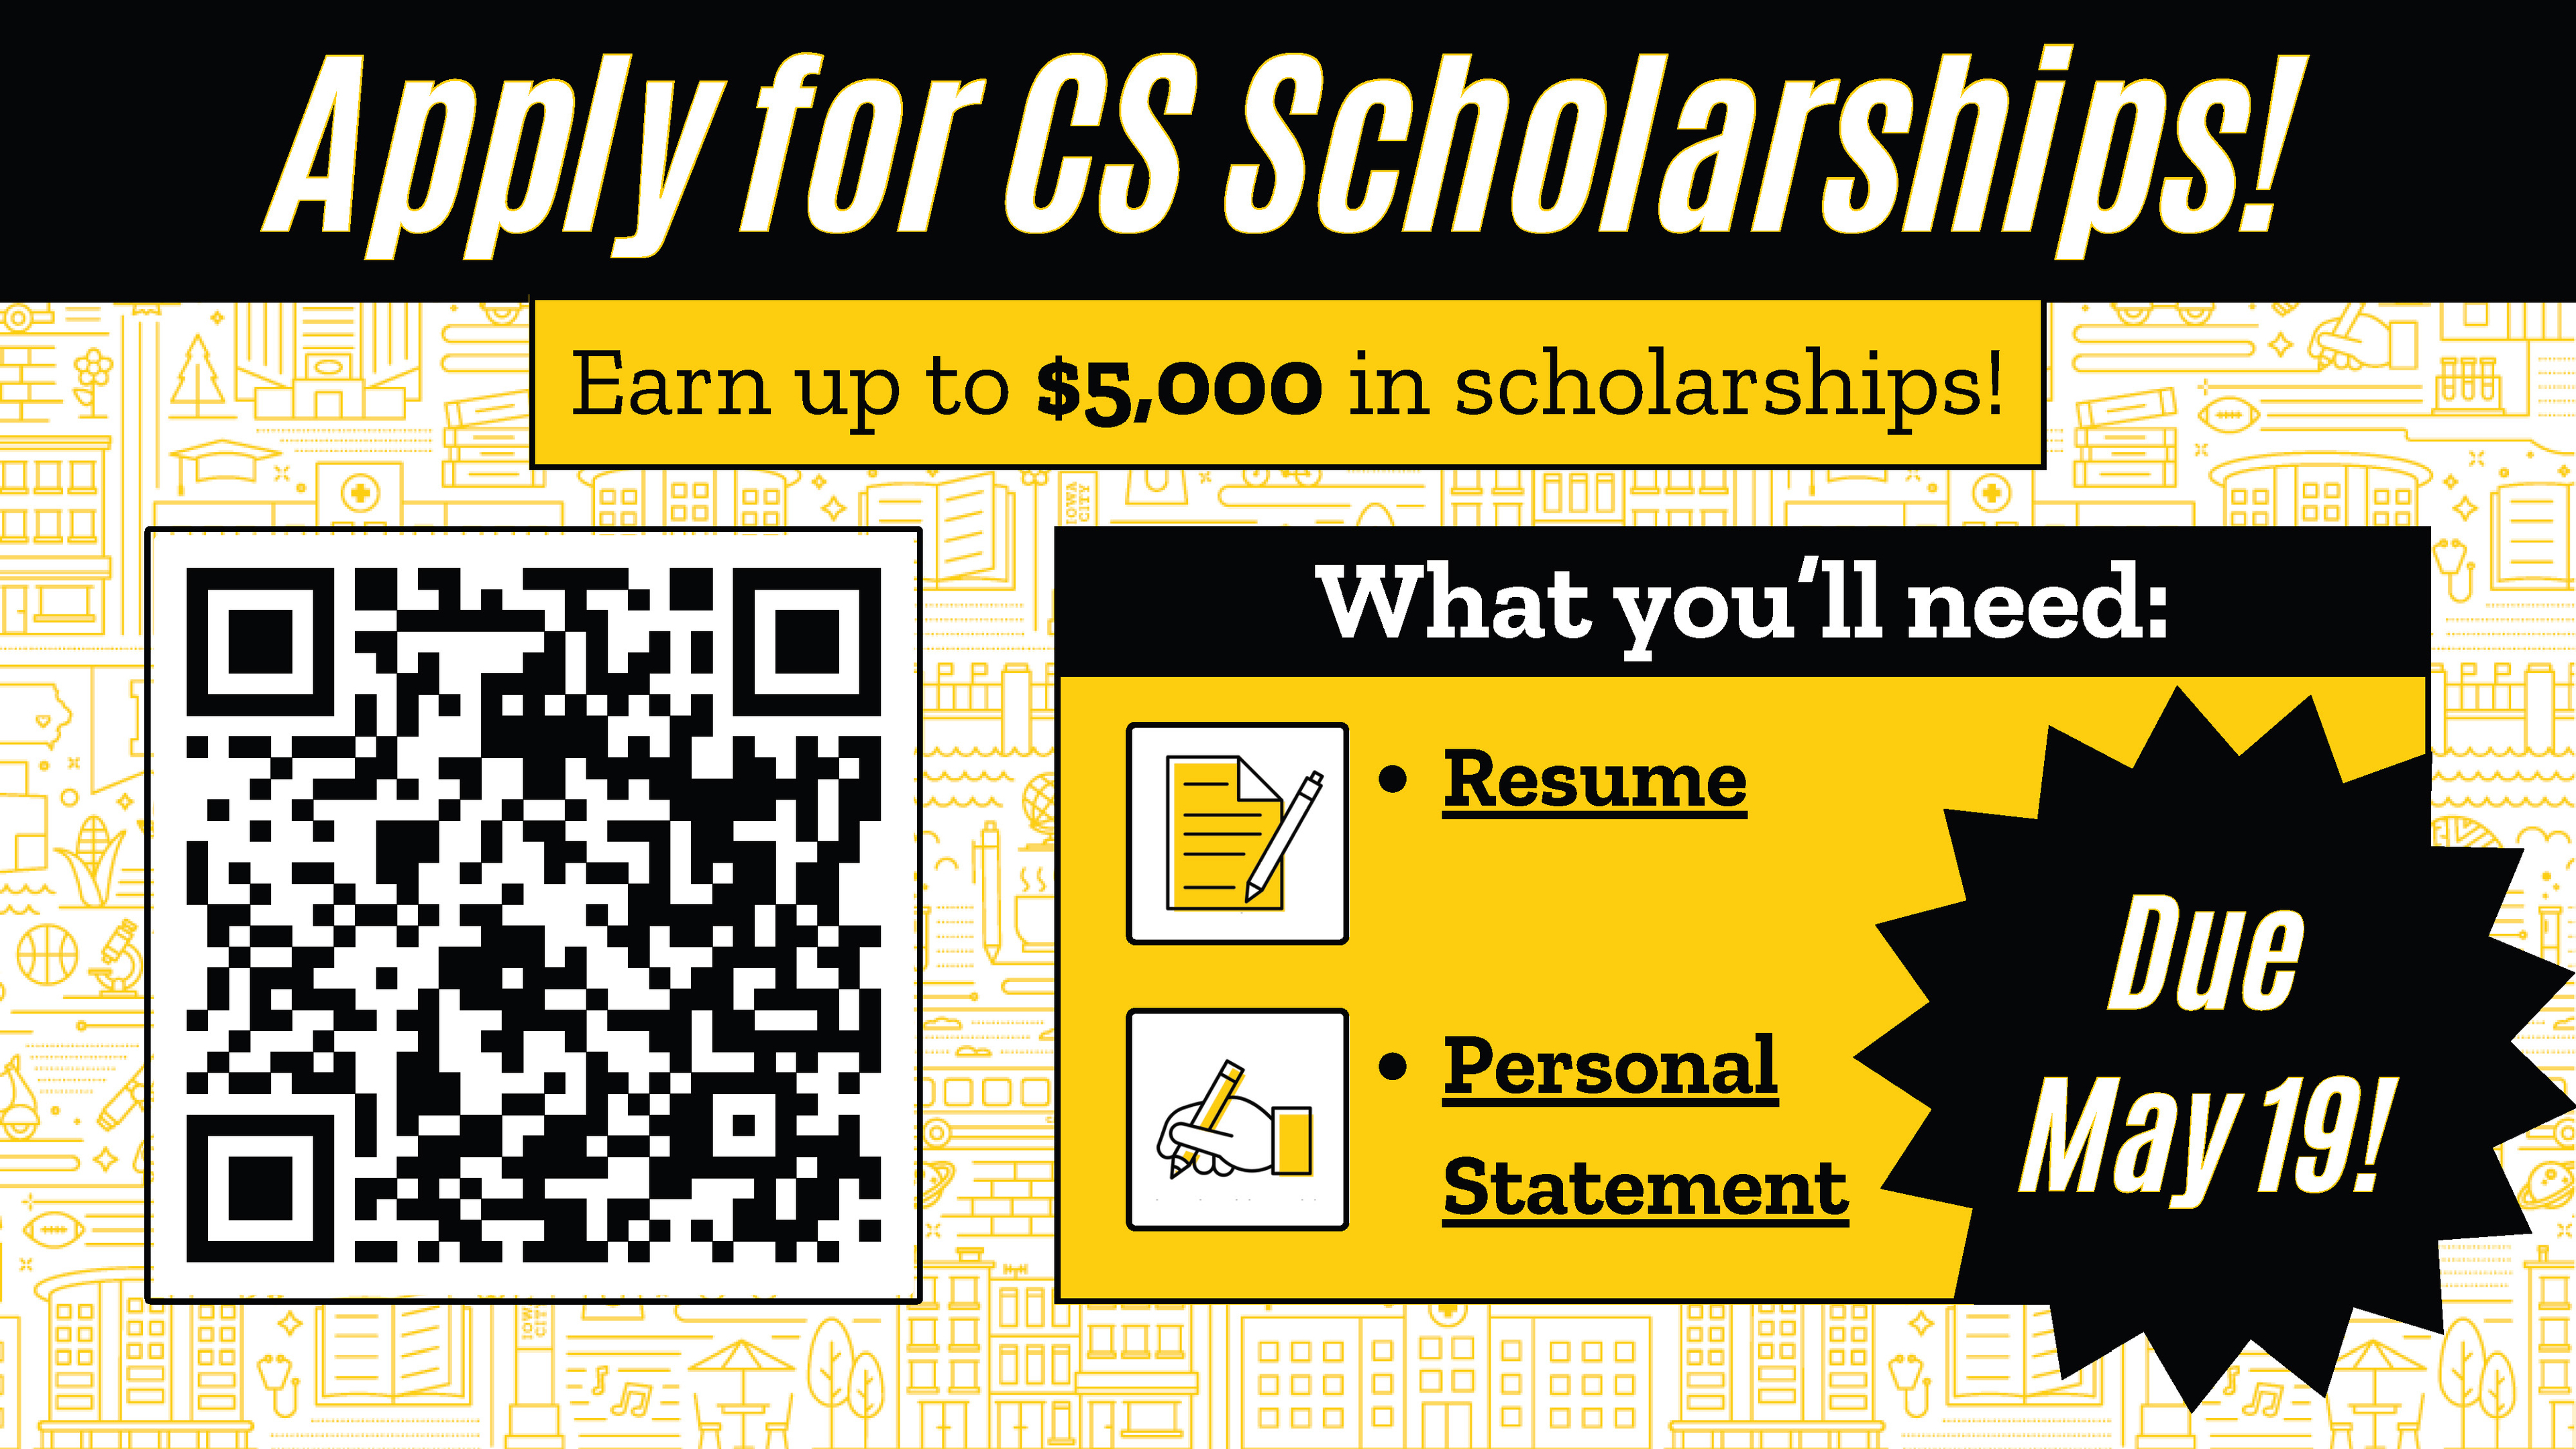 Apply for CS Scholarships! Earn up to $5,000 in scholarships! What you’ll need: Resume &Personal Statement Due May 19!